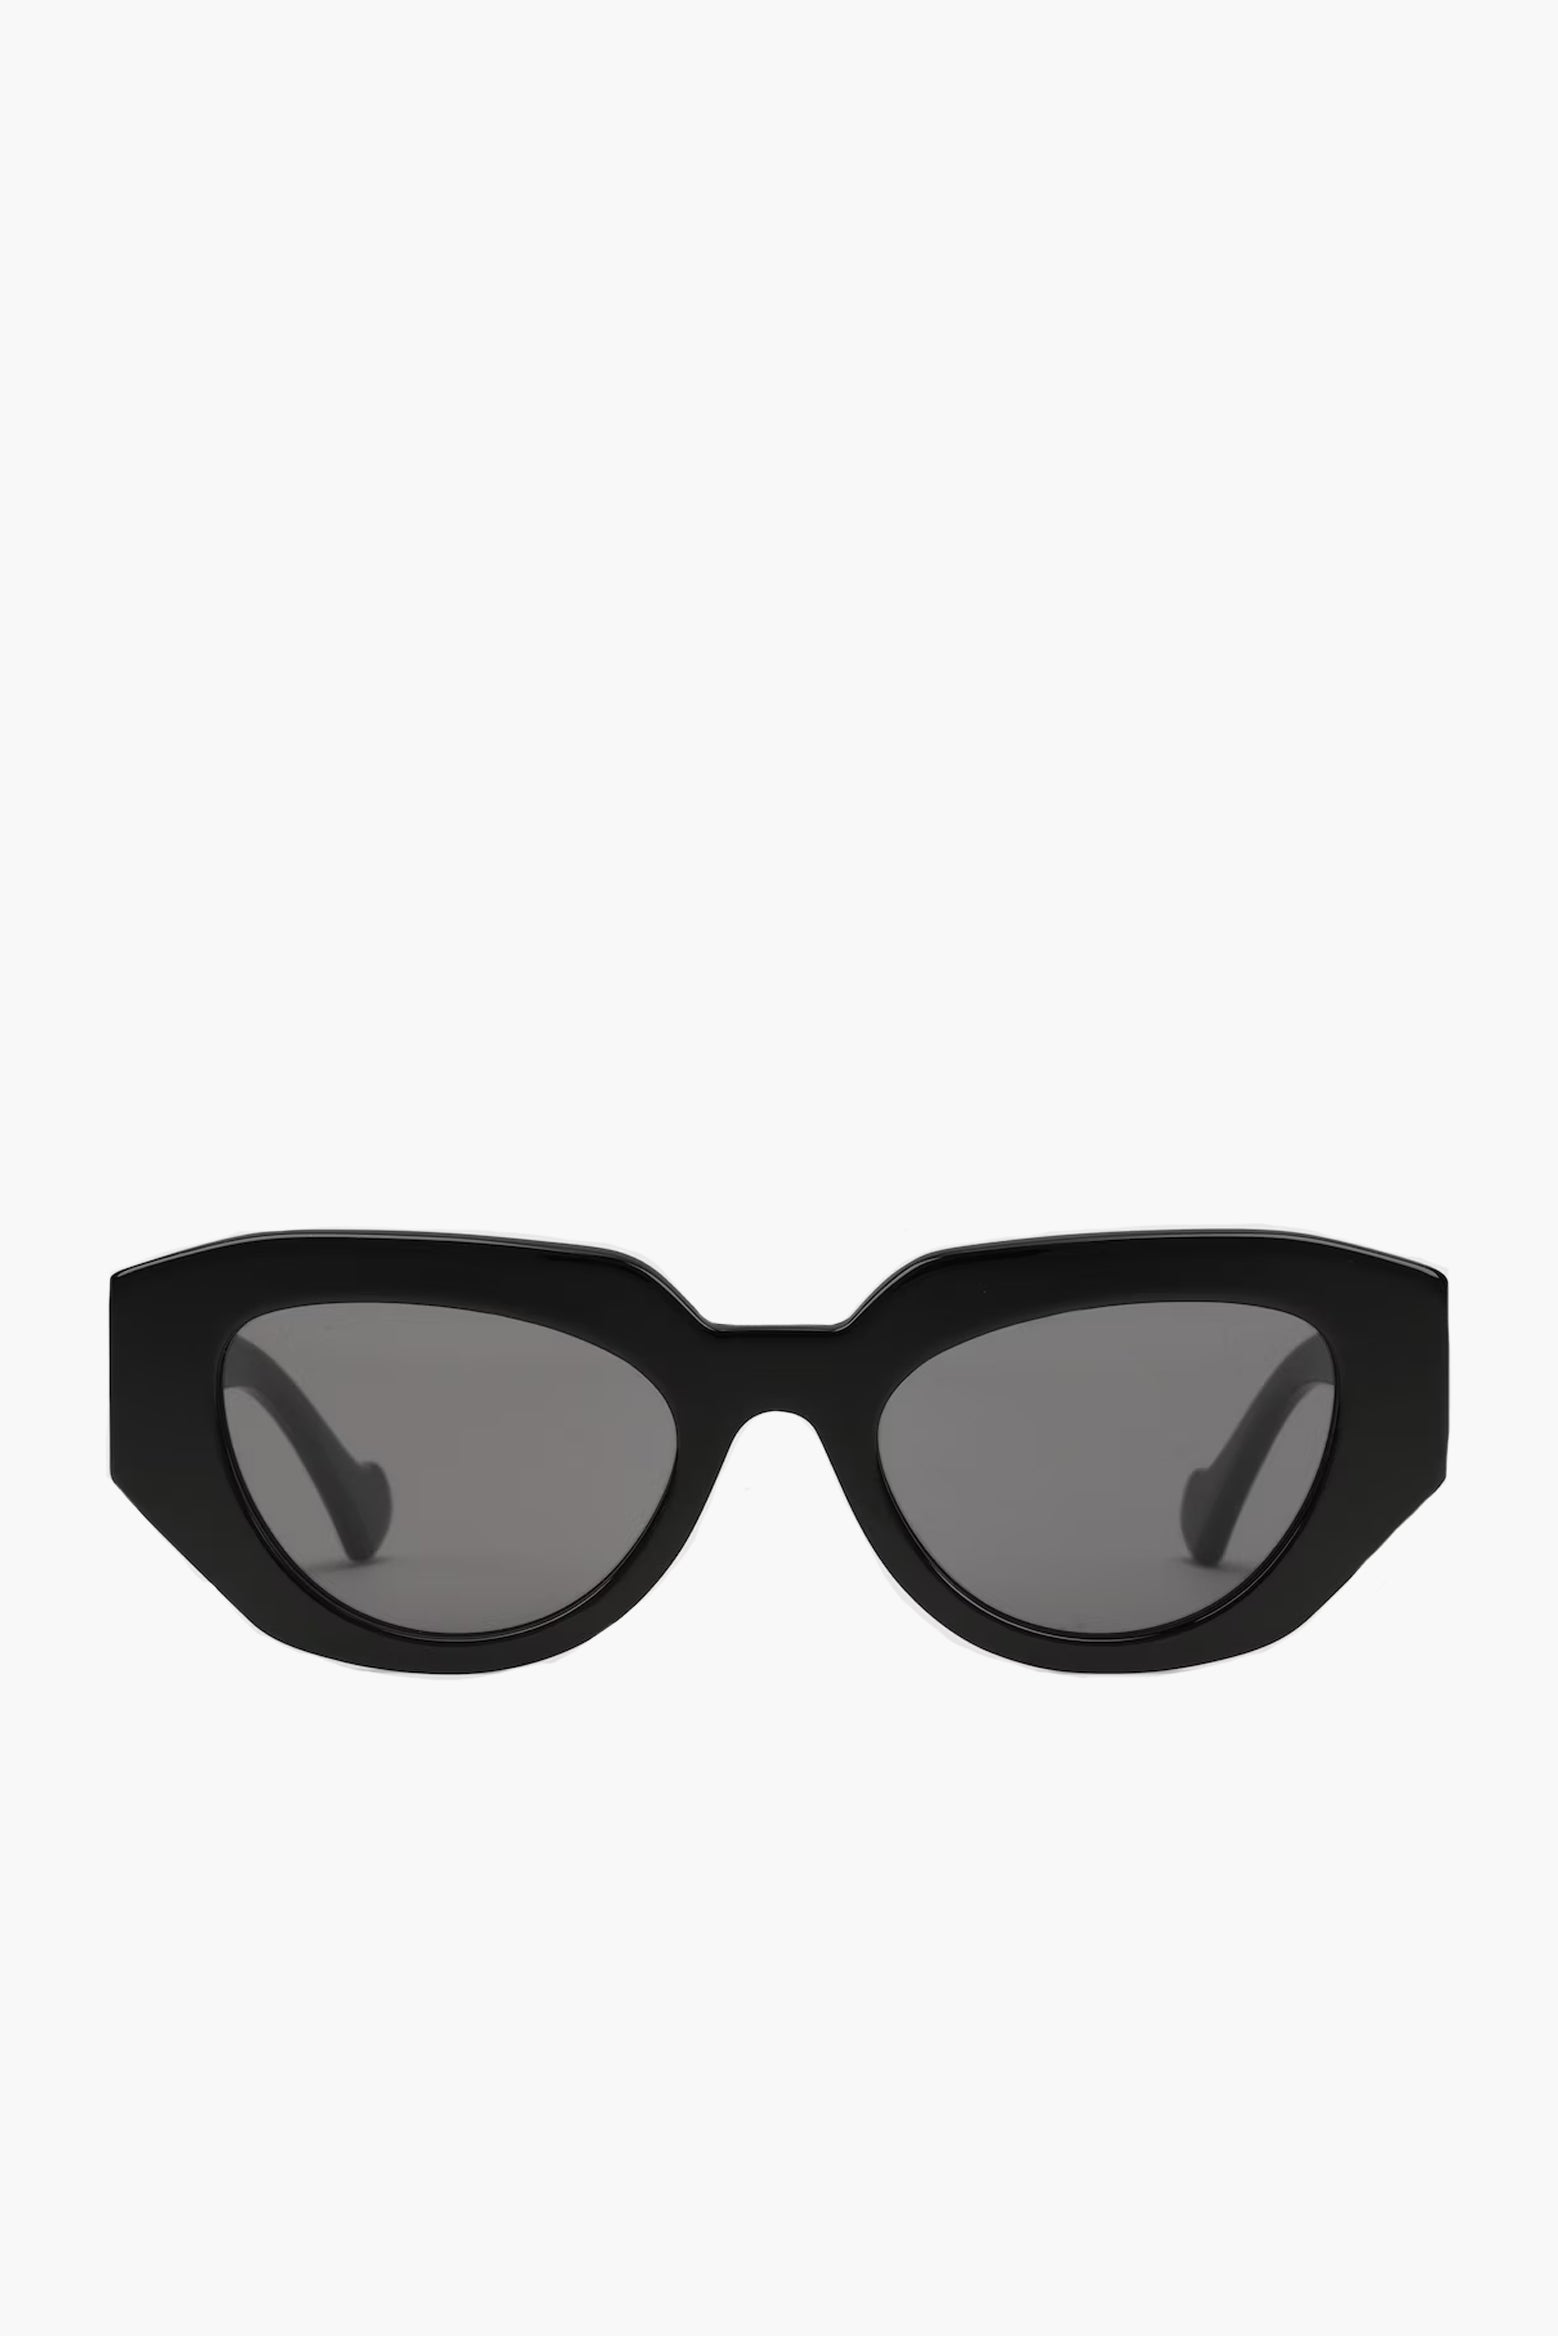 Gucci Geometric Frame Sunglasses in Black available at The New Trend Australia.